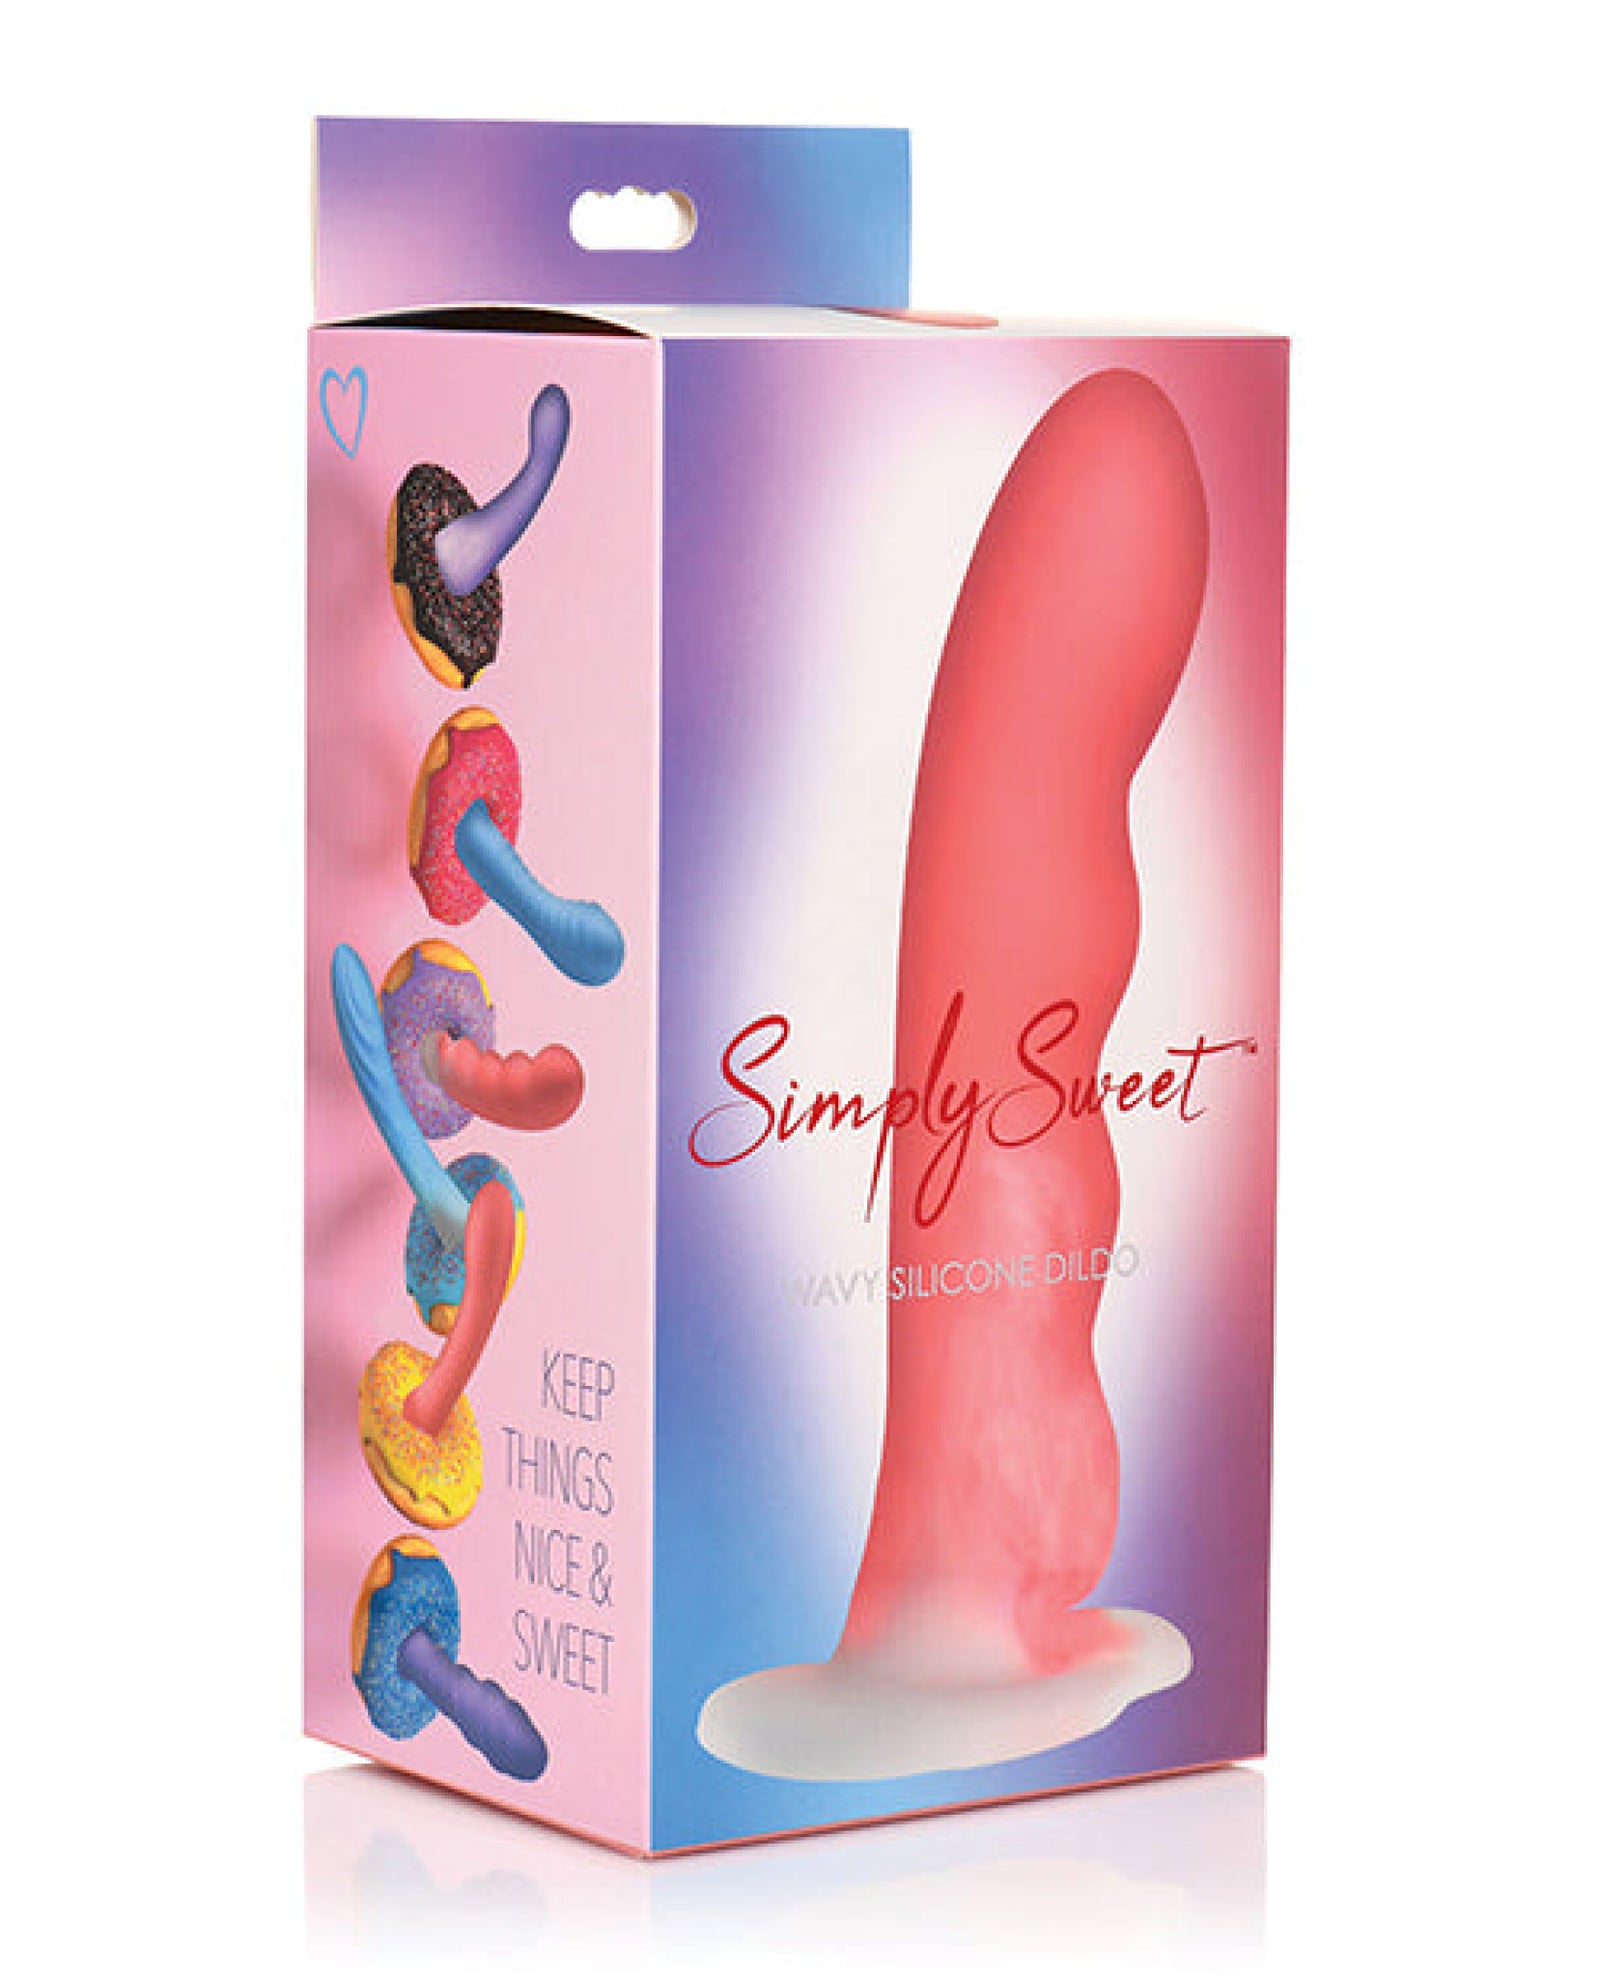 Curve Toys Simply Sweet 7" Wavy Silicone Dildo - Pink/white Curve Toys